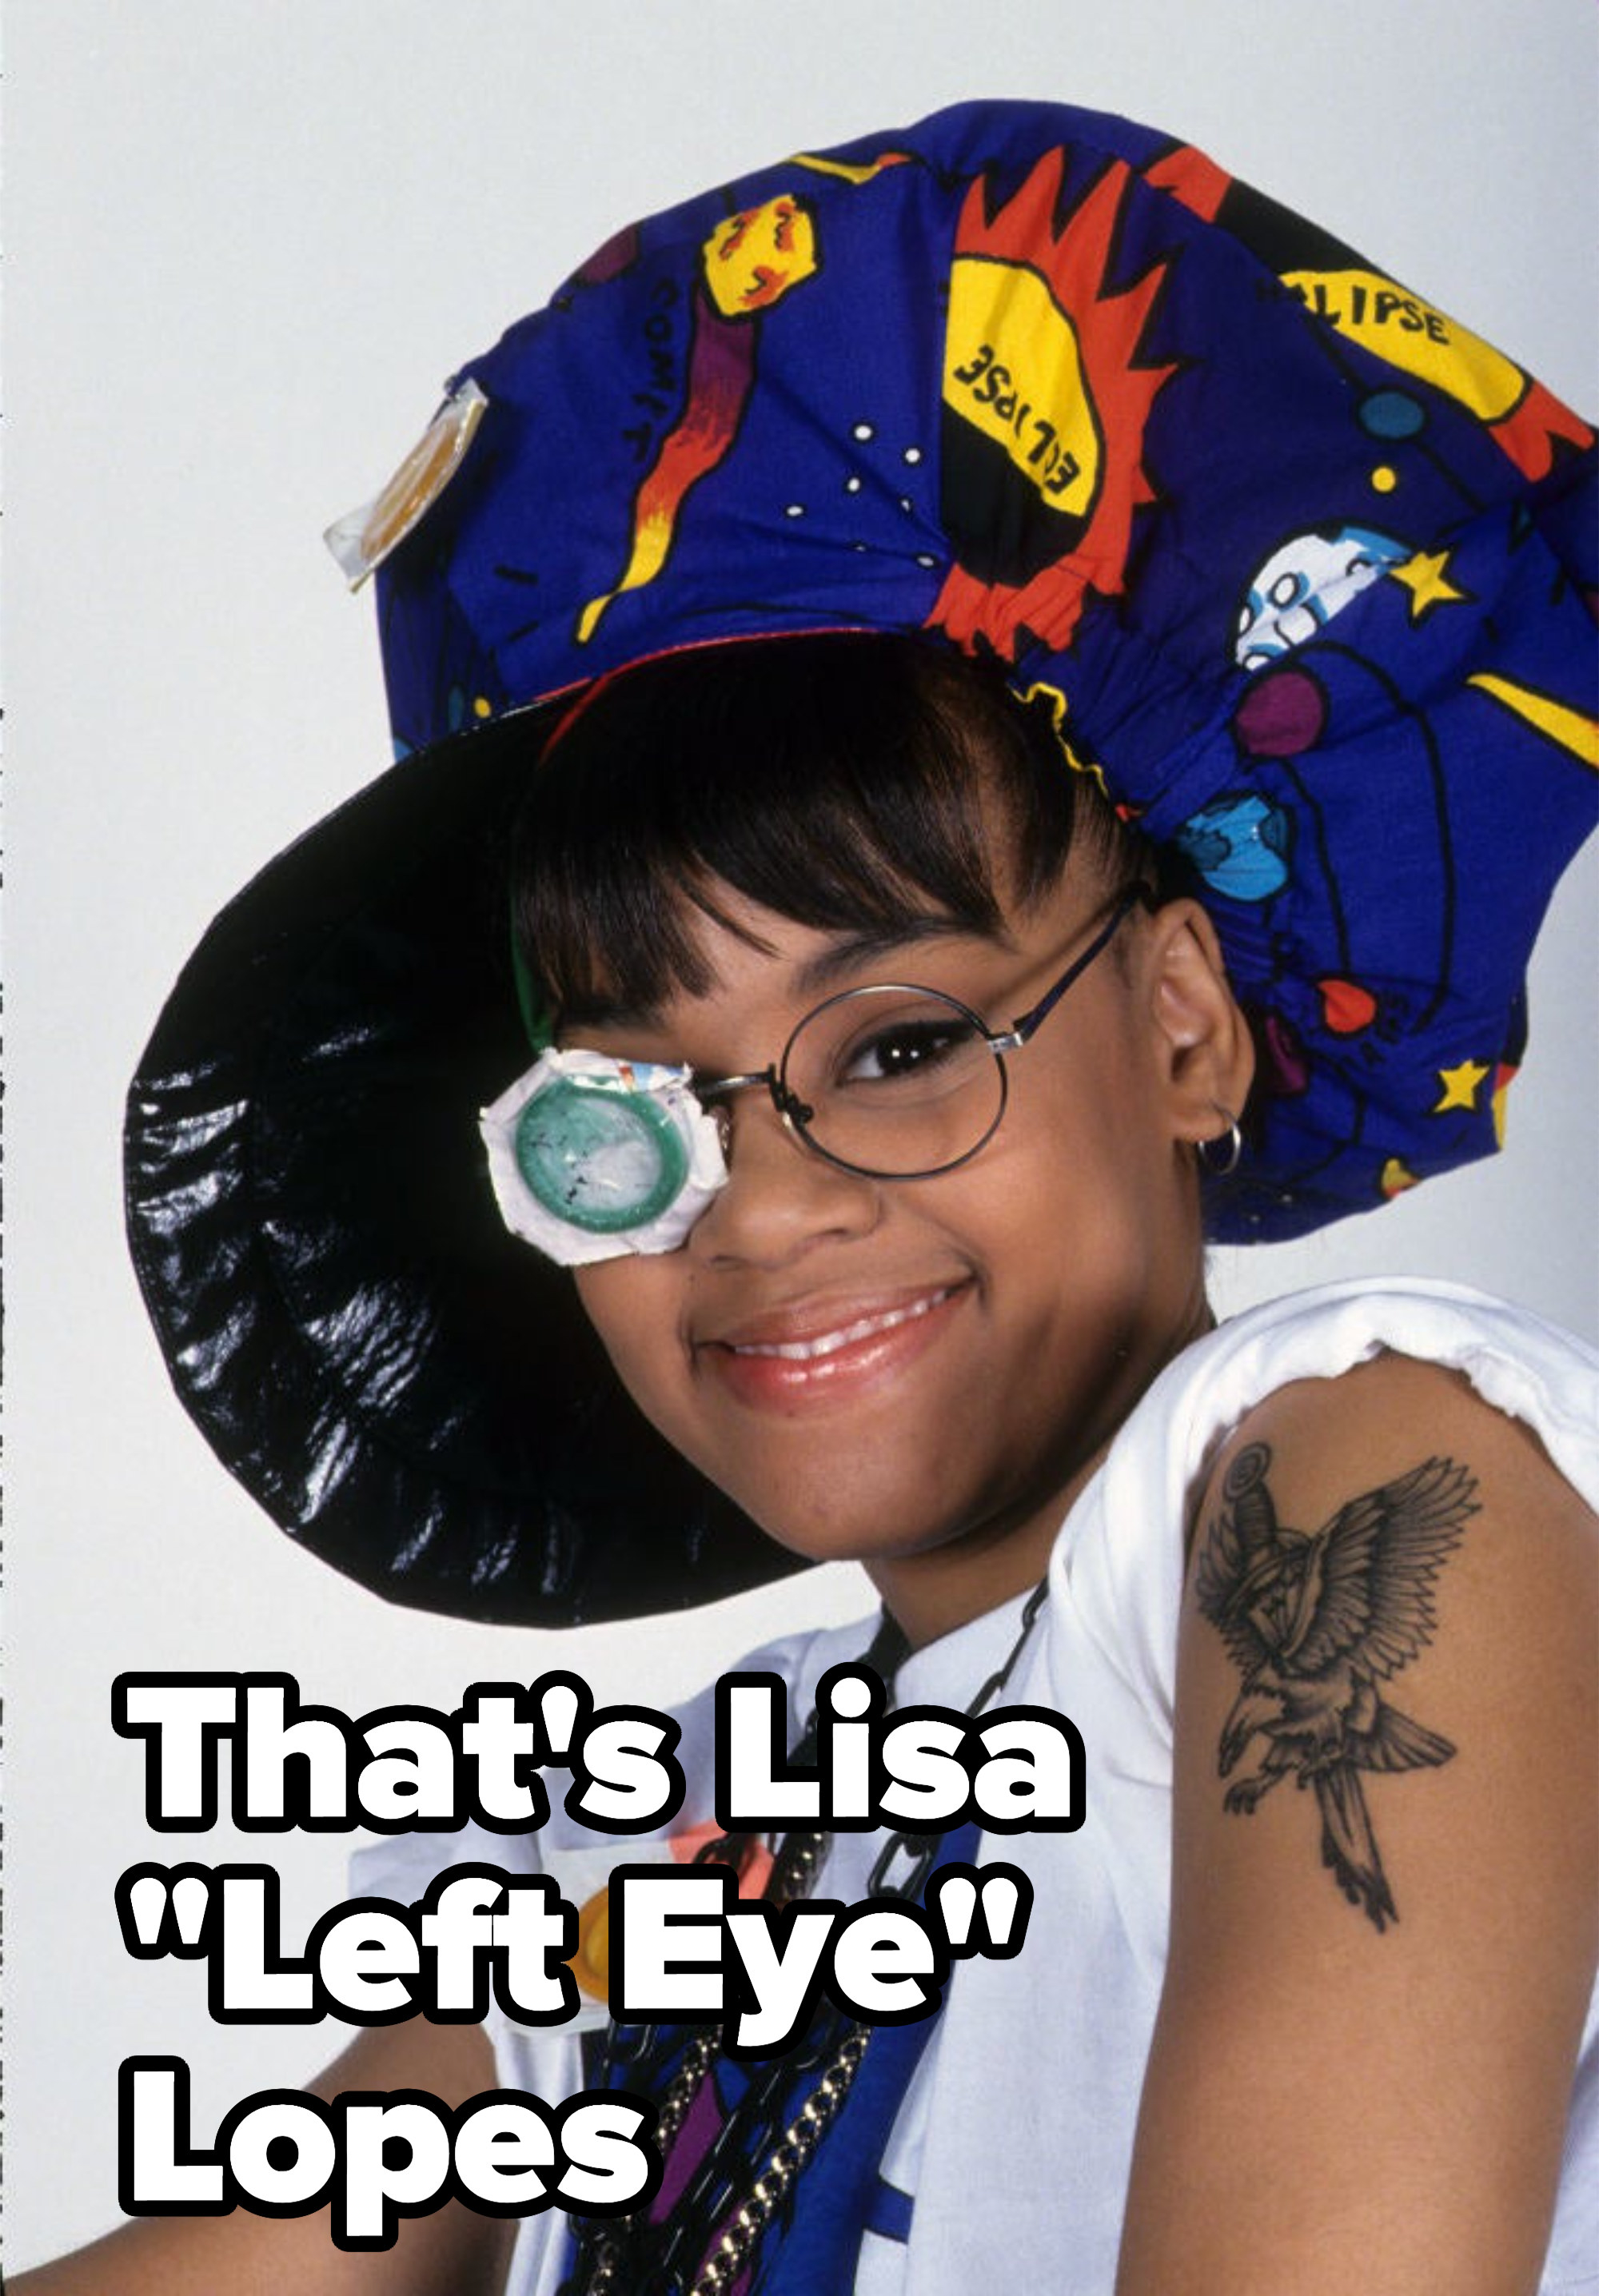 left eye is wearing a condom and a large hat